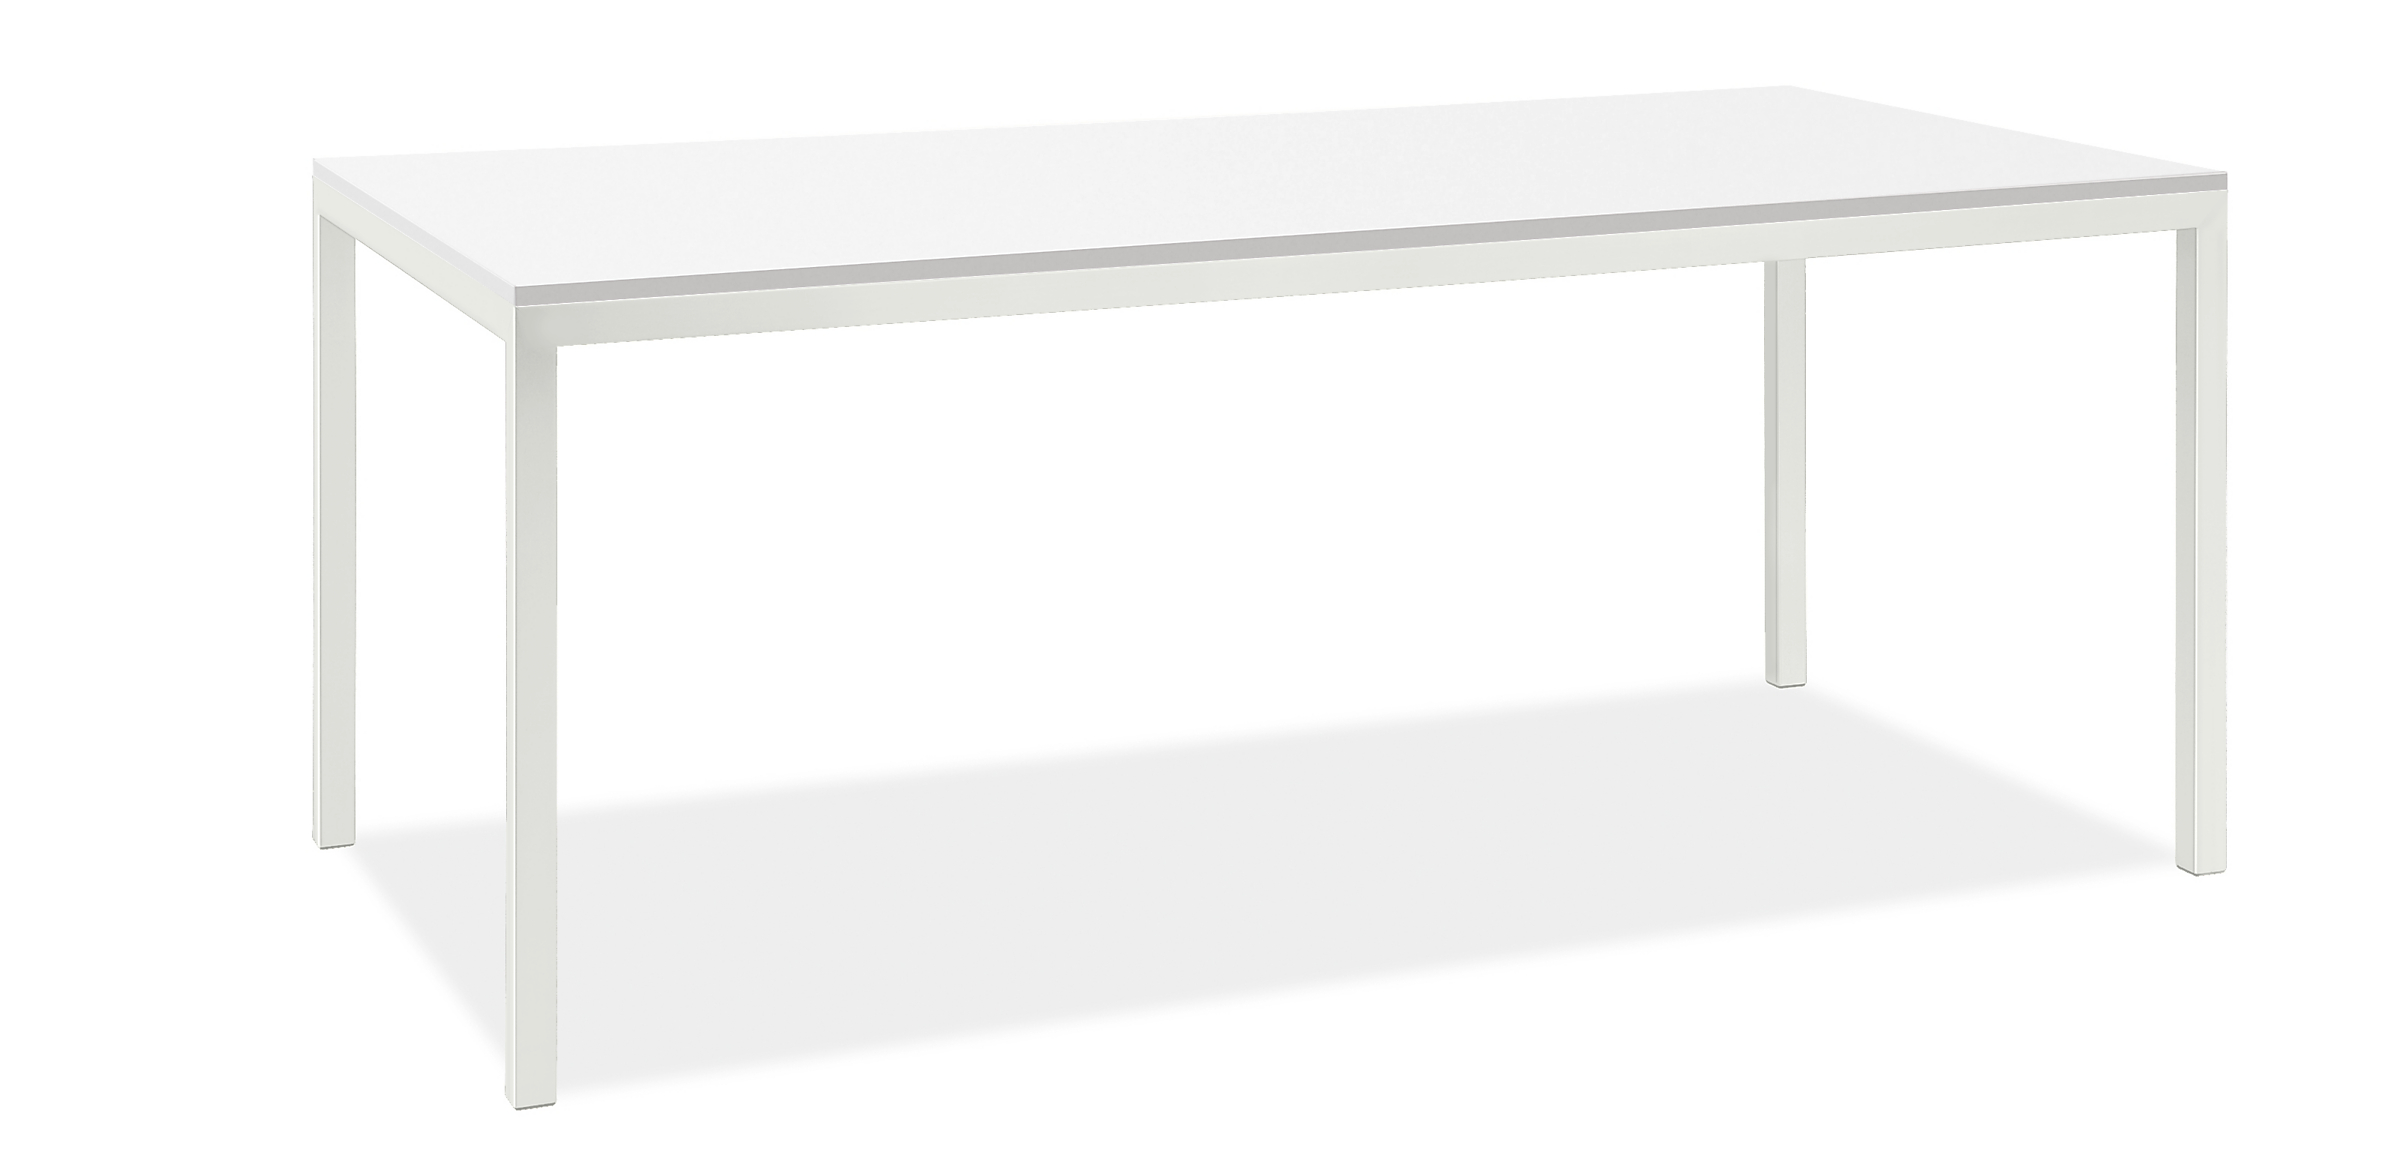 Parsons 72w 36d Table with 1.5" Leg